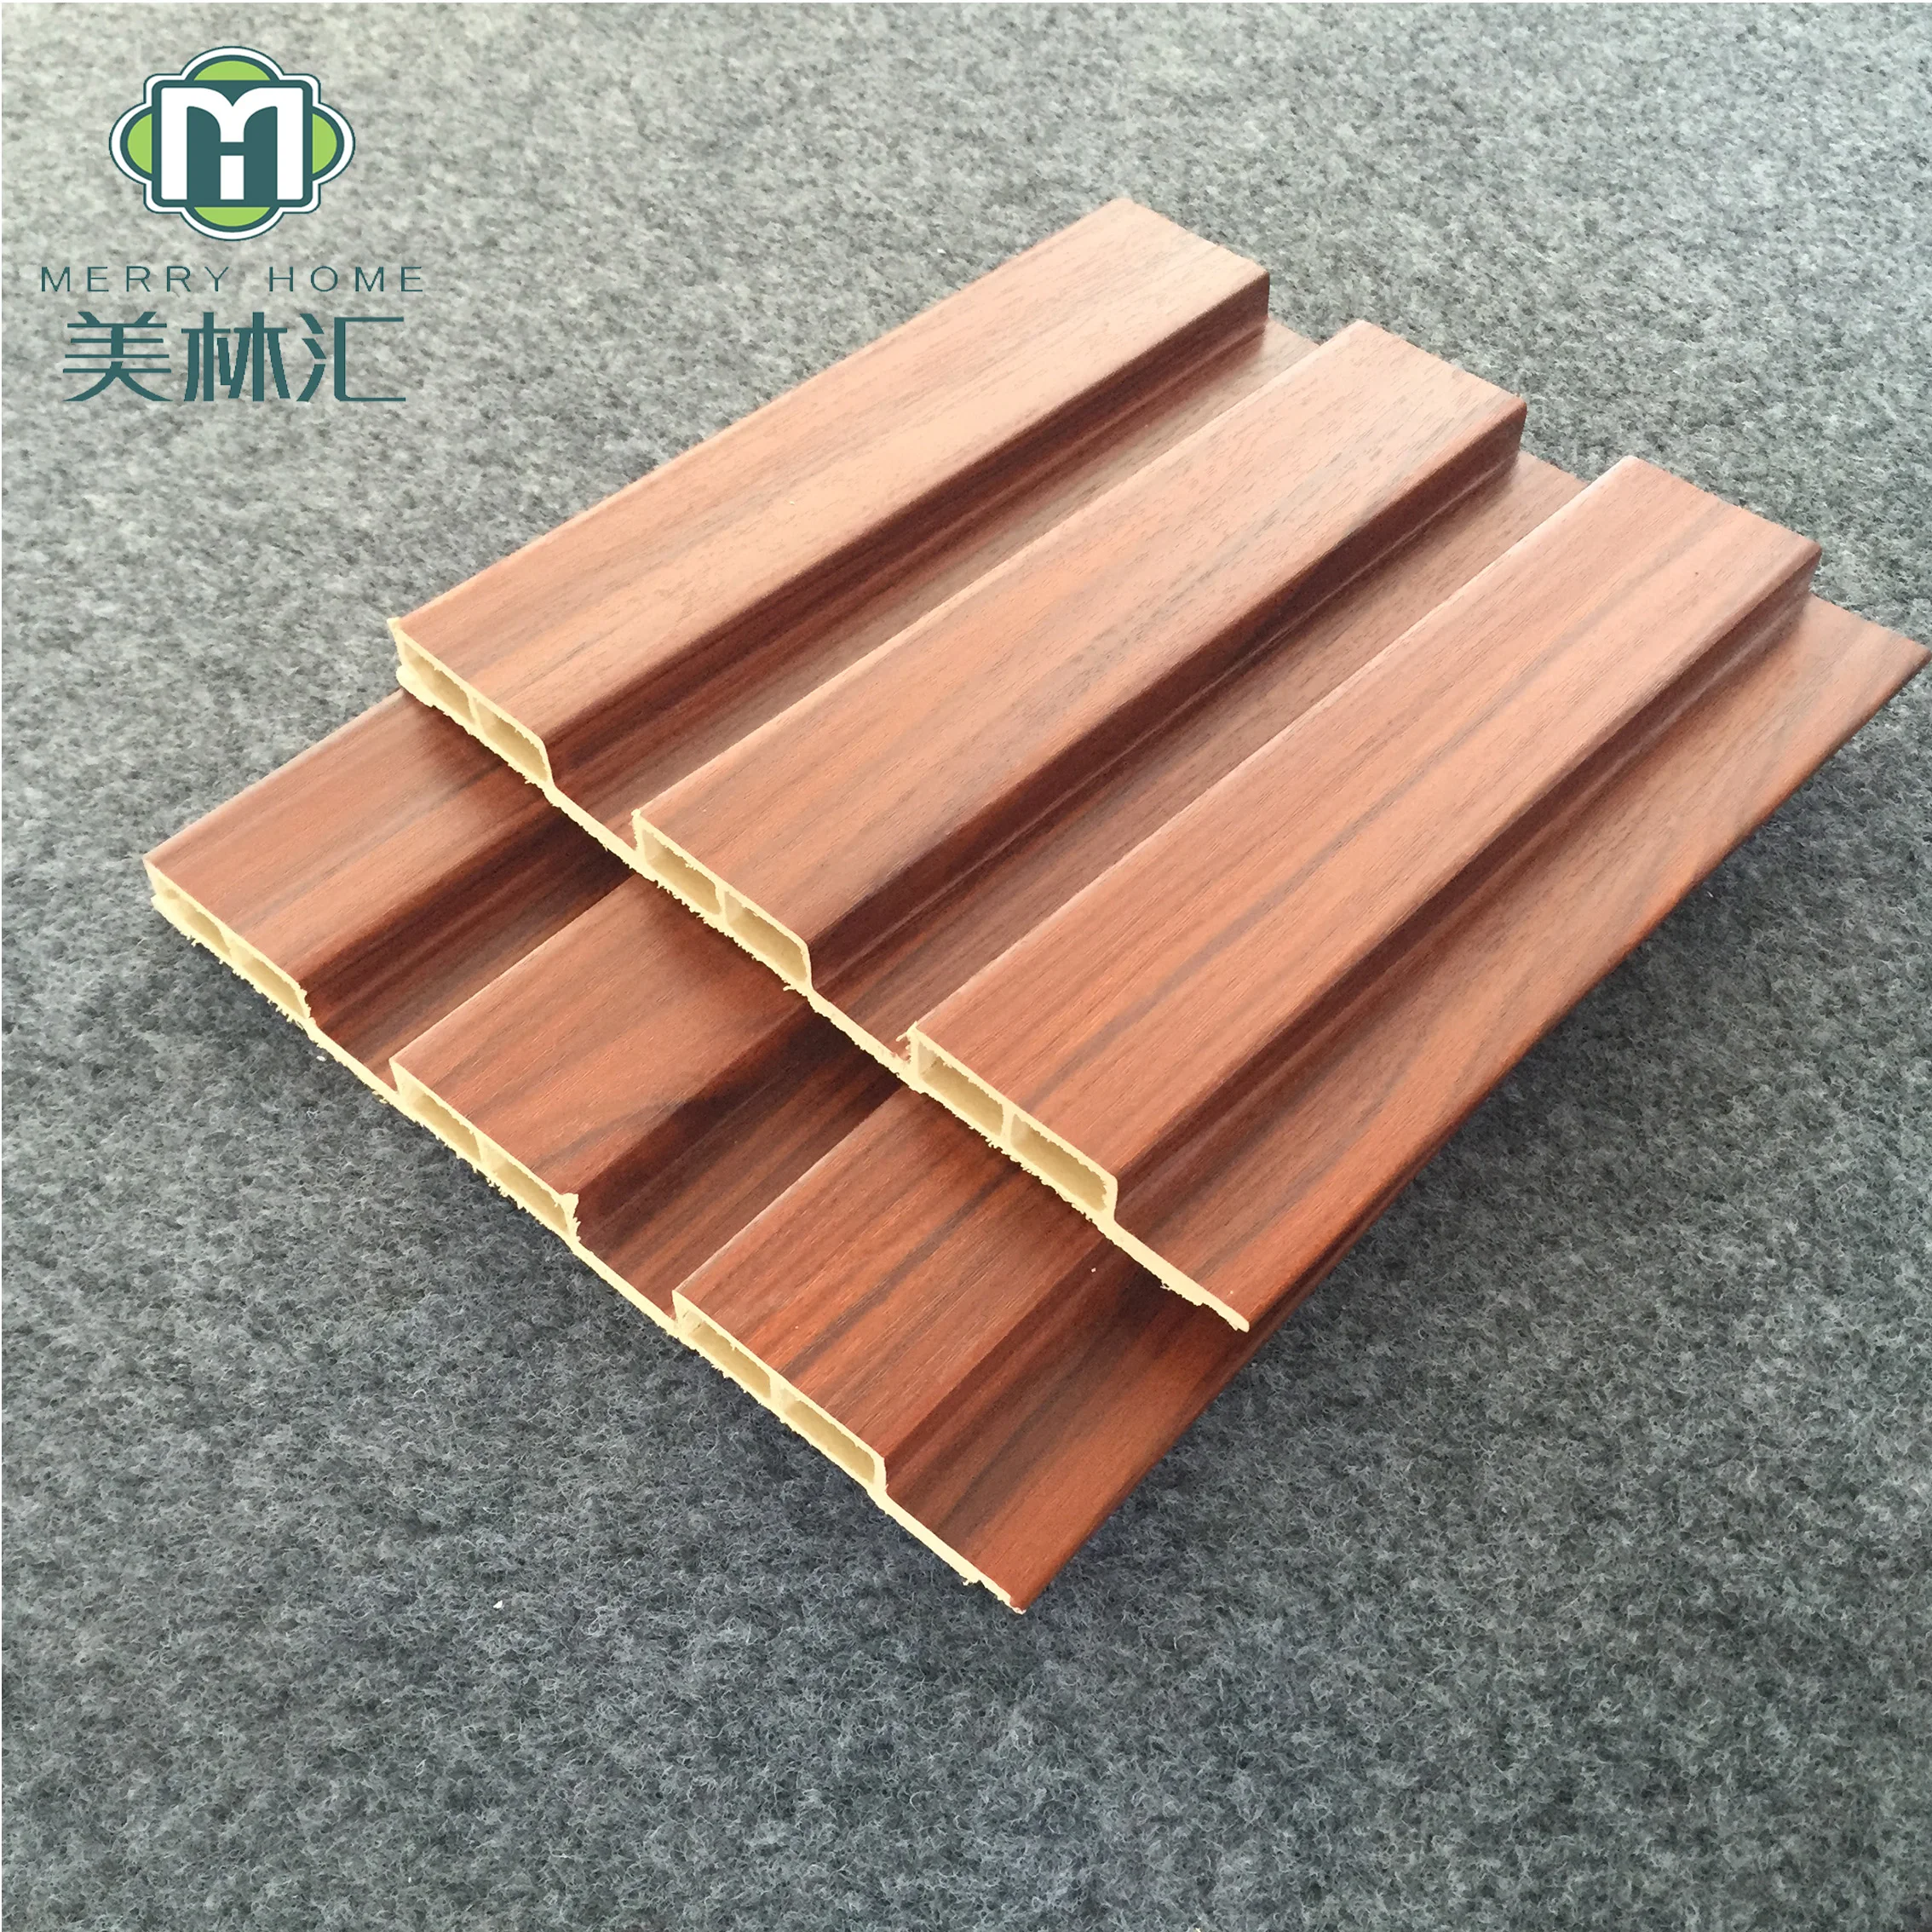 Pvc Tongue And Groove Board Mdf Ceiling Panel Interior Decorative Faux Tin Ceiling Tile White Wooden Acoustic Panel Ceiling Buy Wooden Acoustic